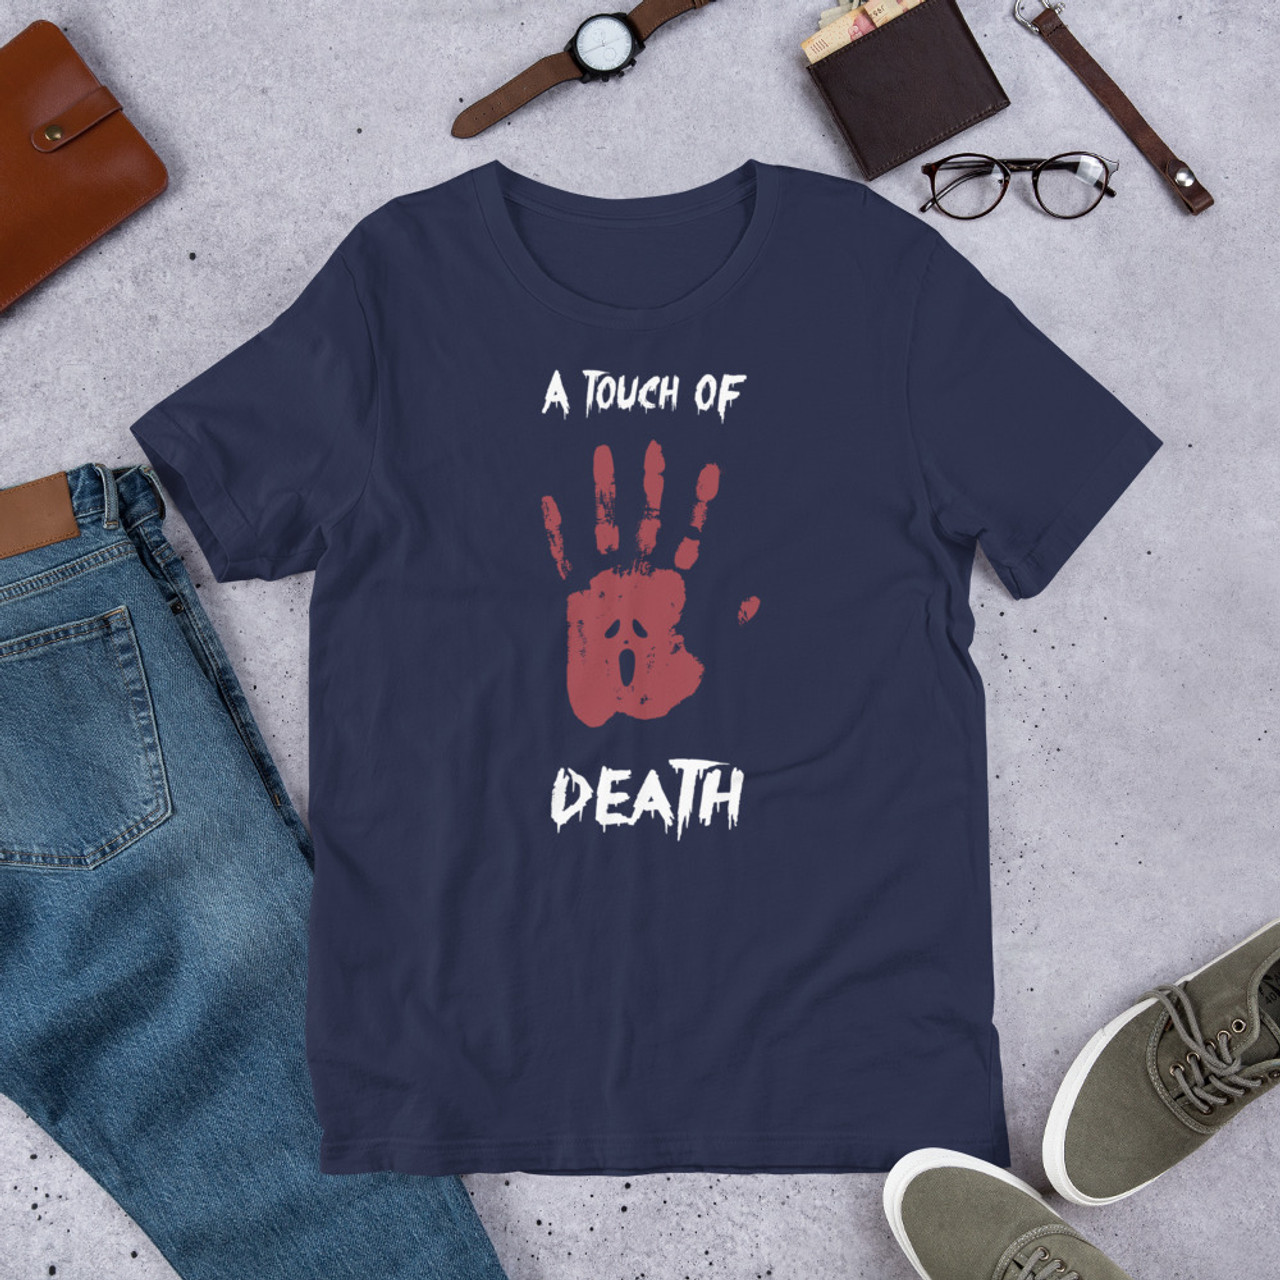 Navy T-Shirt - Bella + Canvas 3001 A Touch Of Death